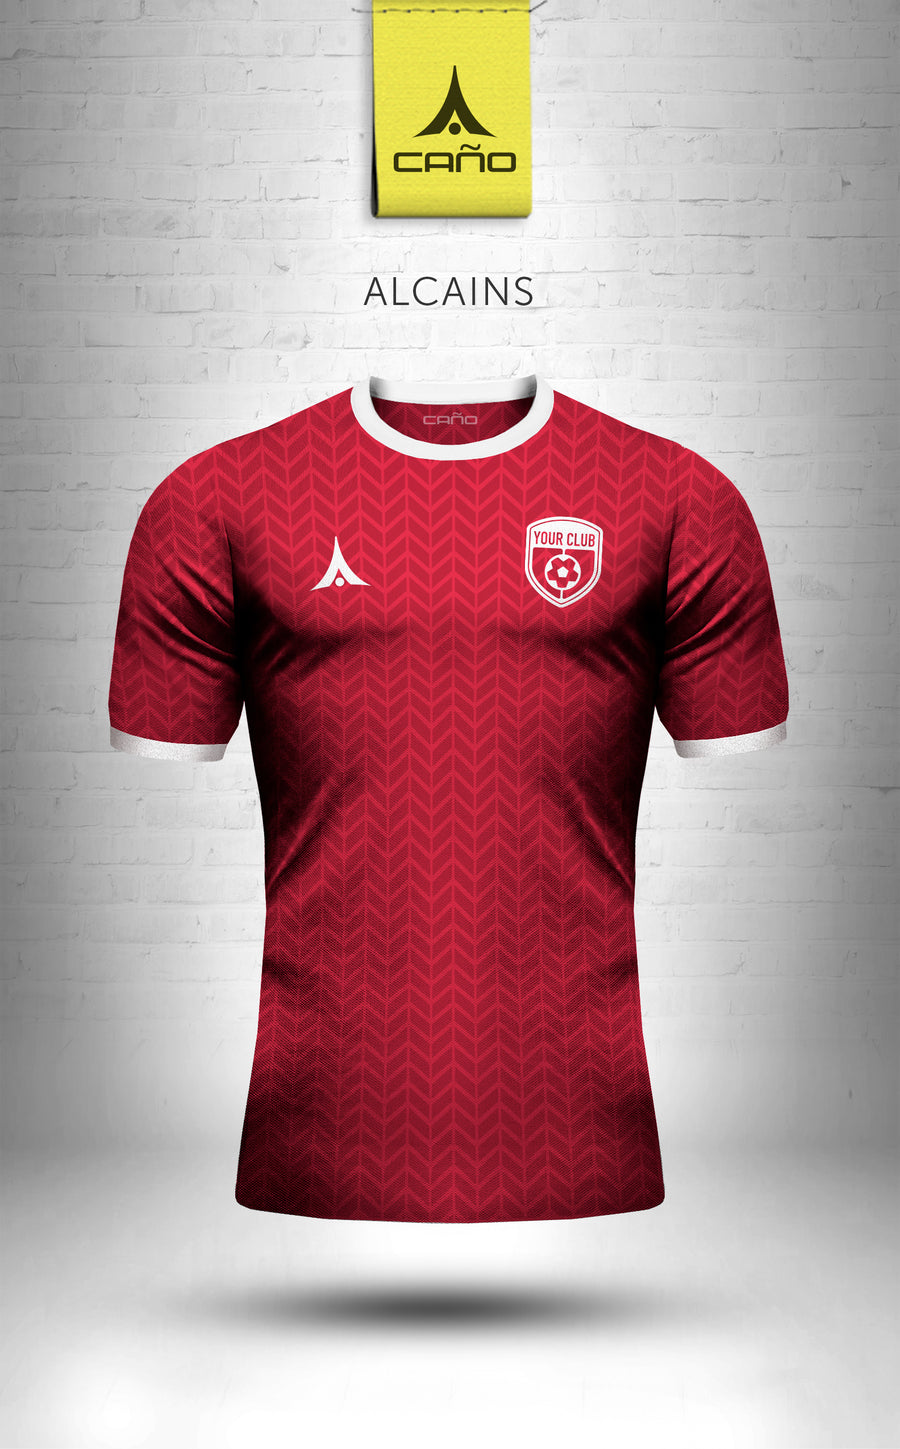 Alcains in red/white